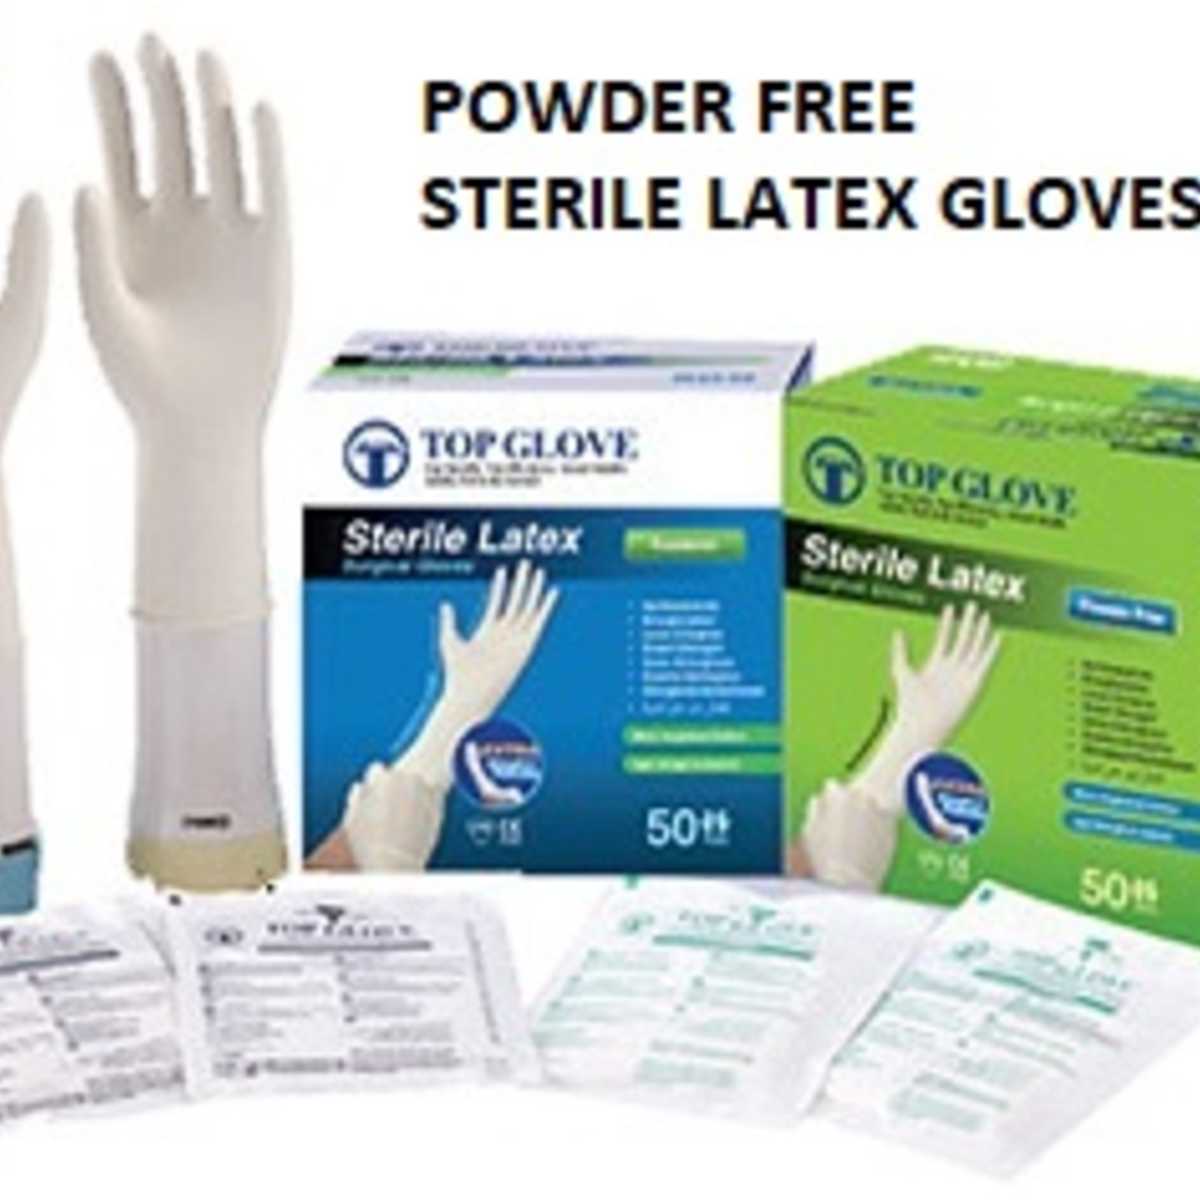 6.0 Sterile Latex Surgical Glove, Powdered Free